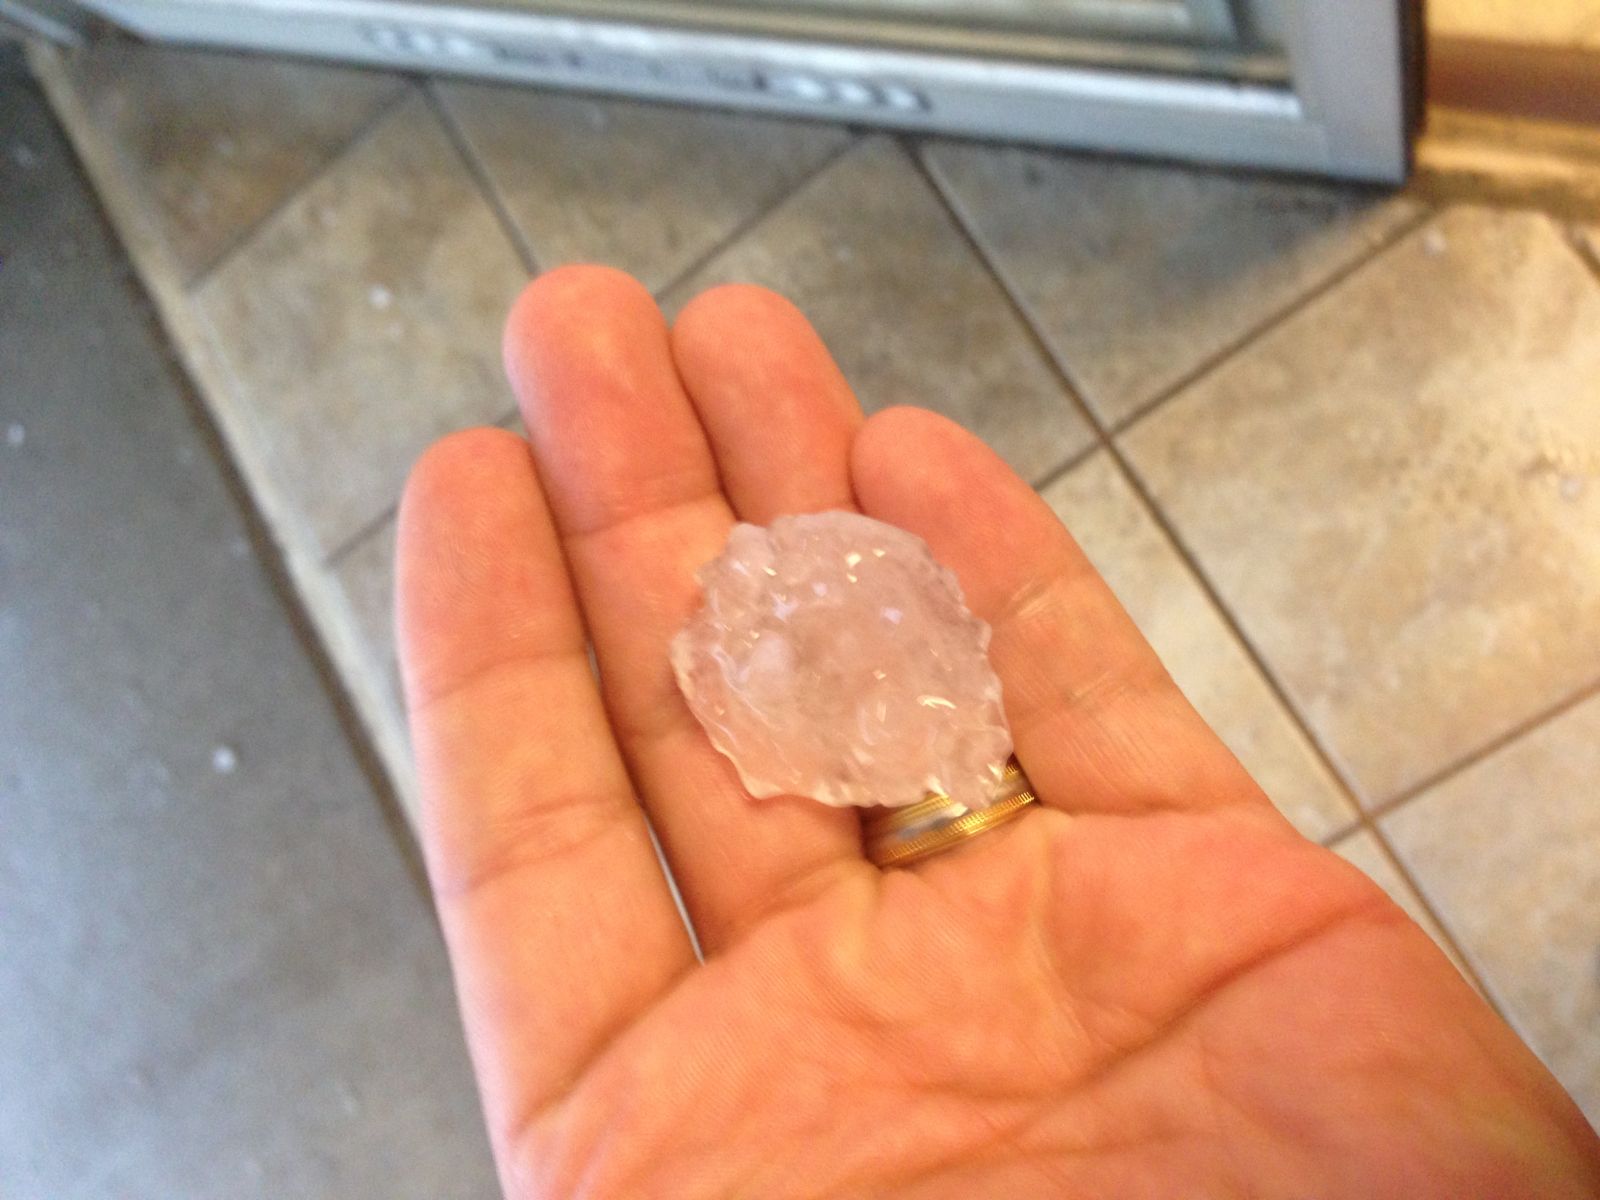 hail from Aug 7, 2013